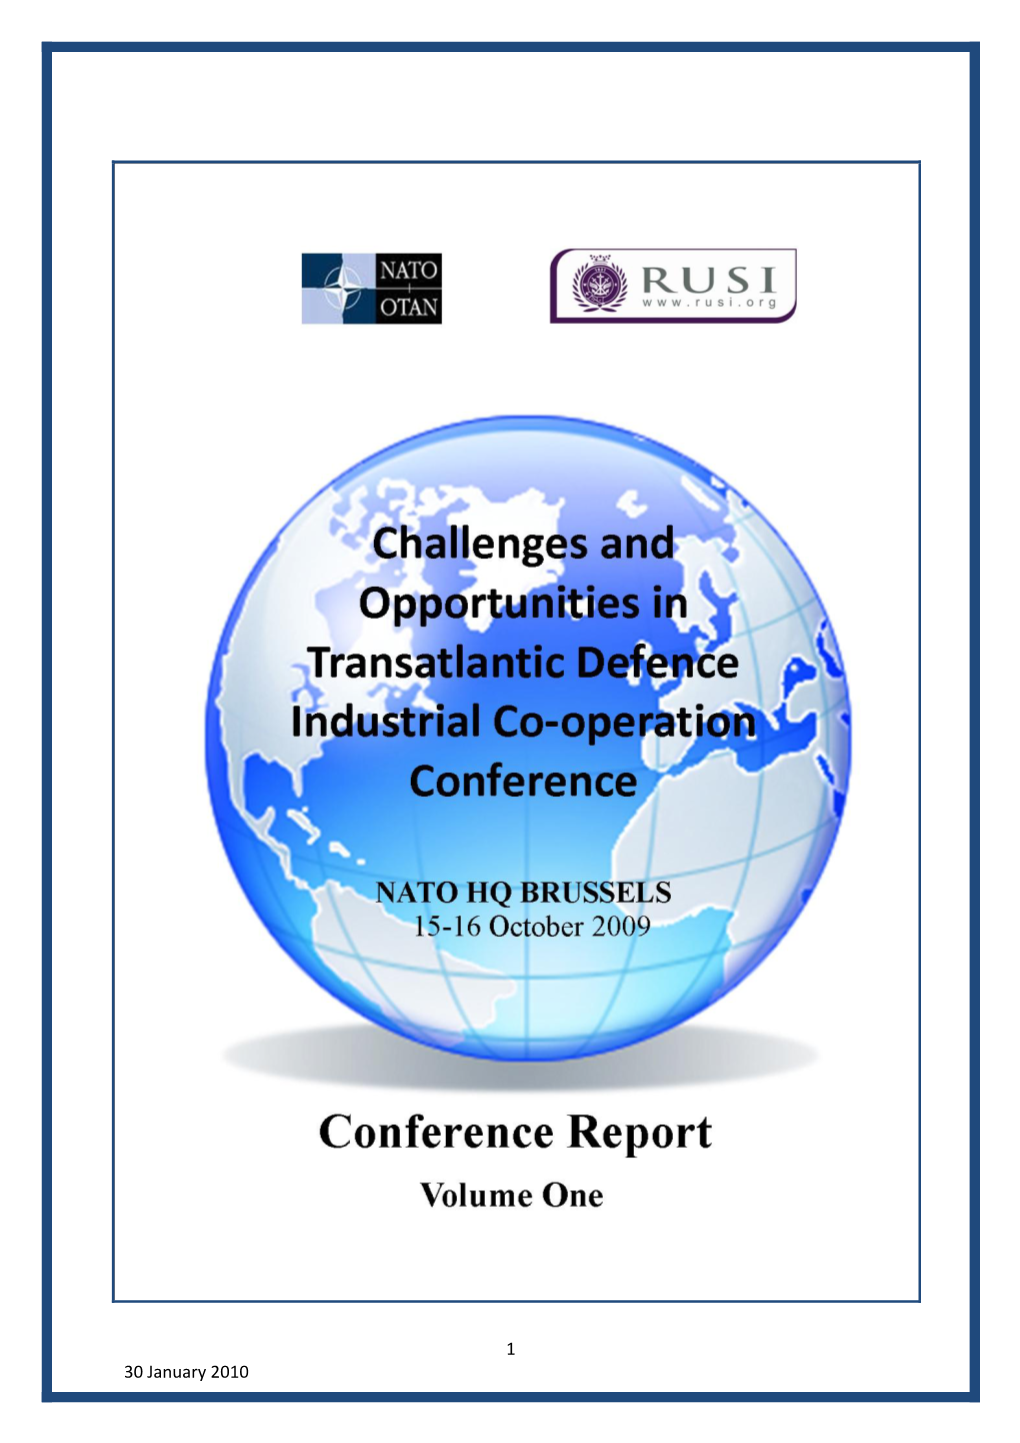 Challenges and Opportunities in Transatlantic Defence Industrial Co-Operation Conference Vol 1